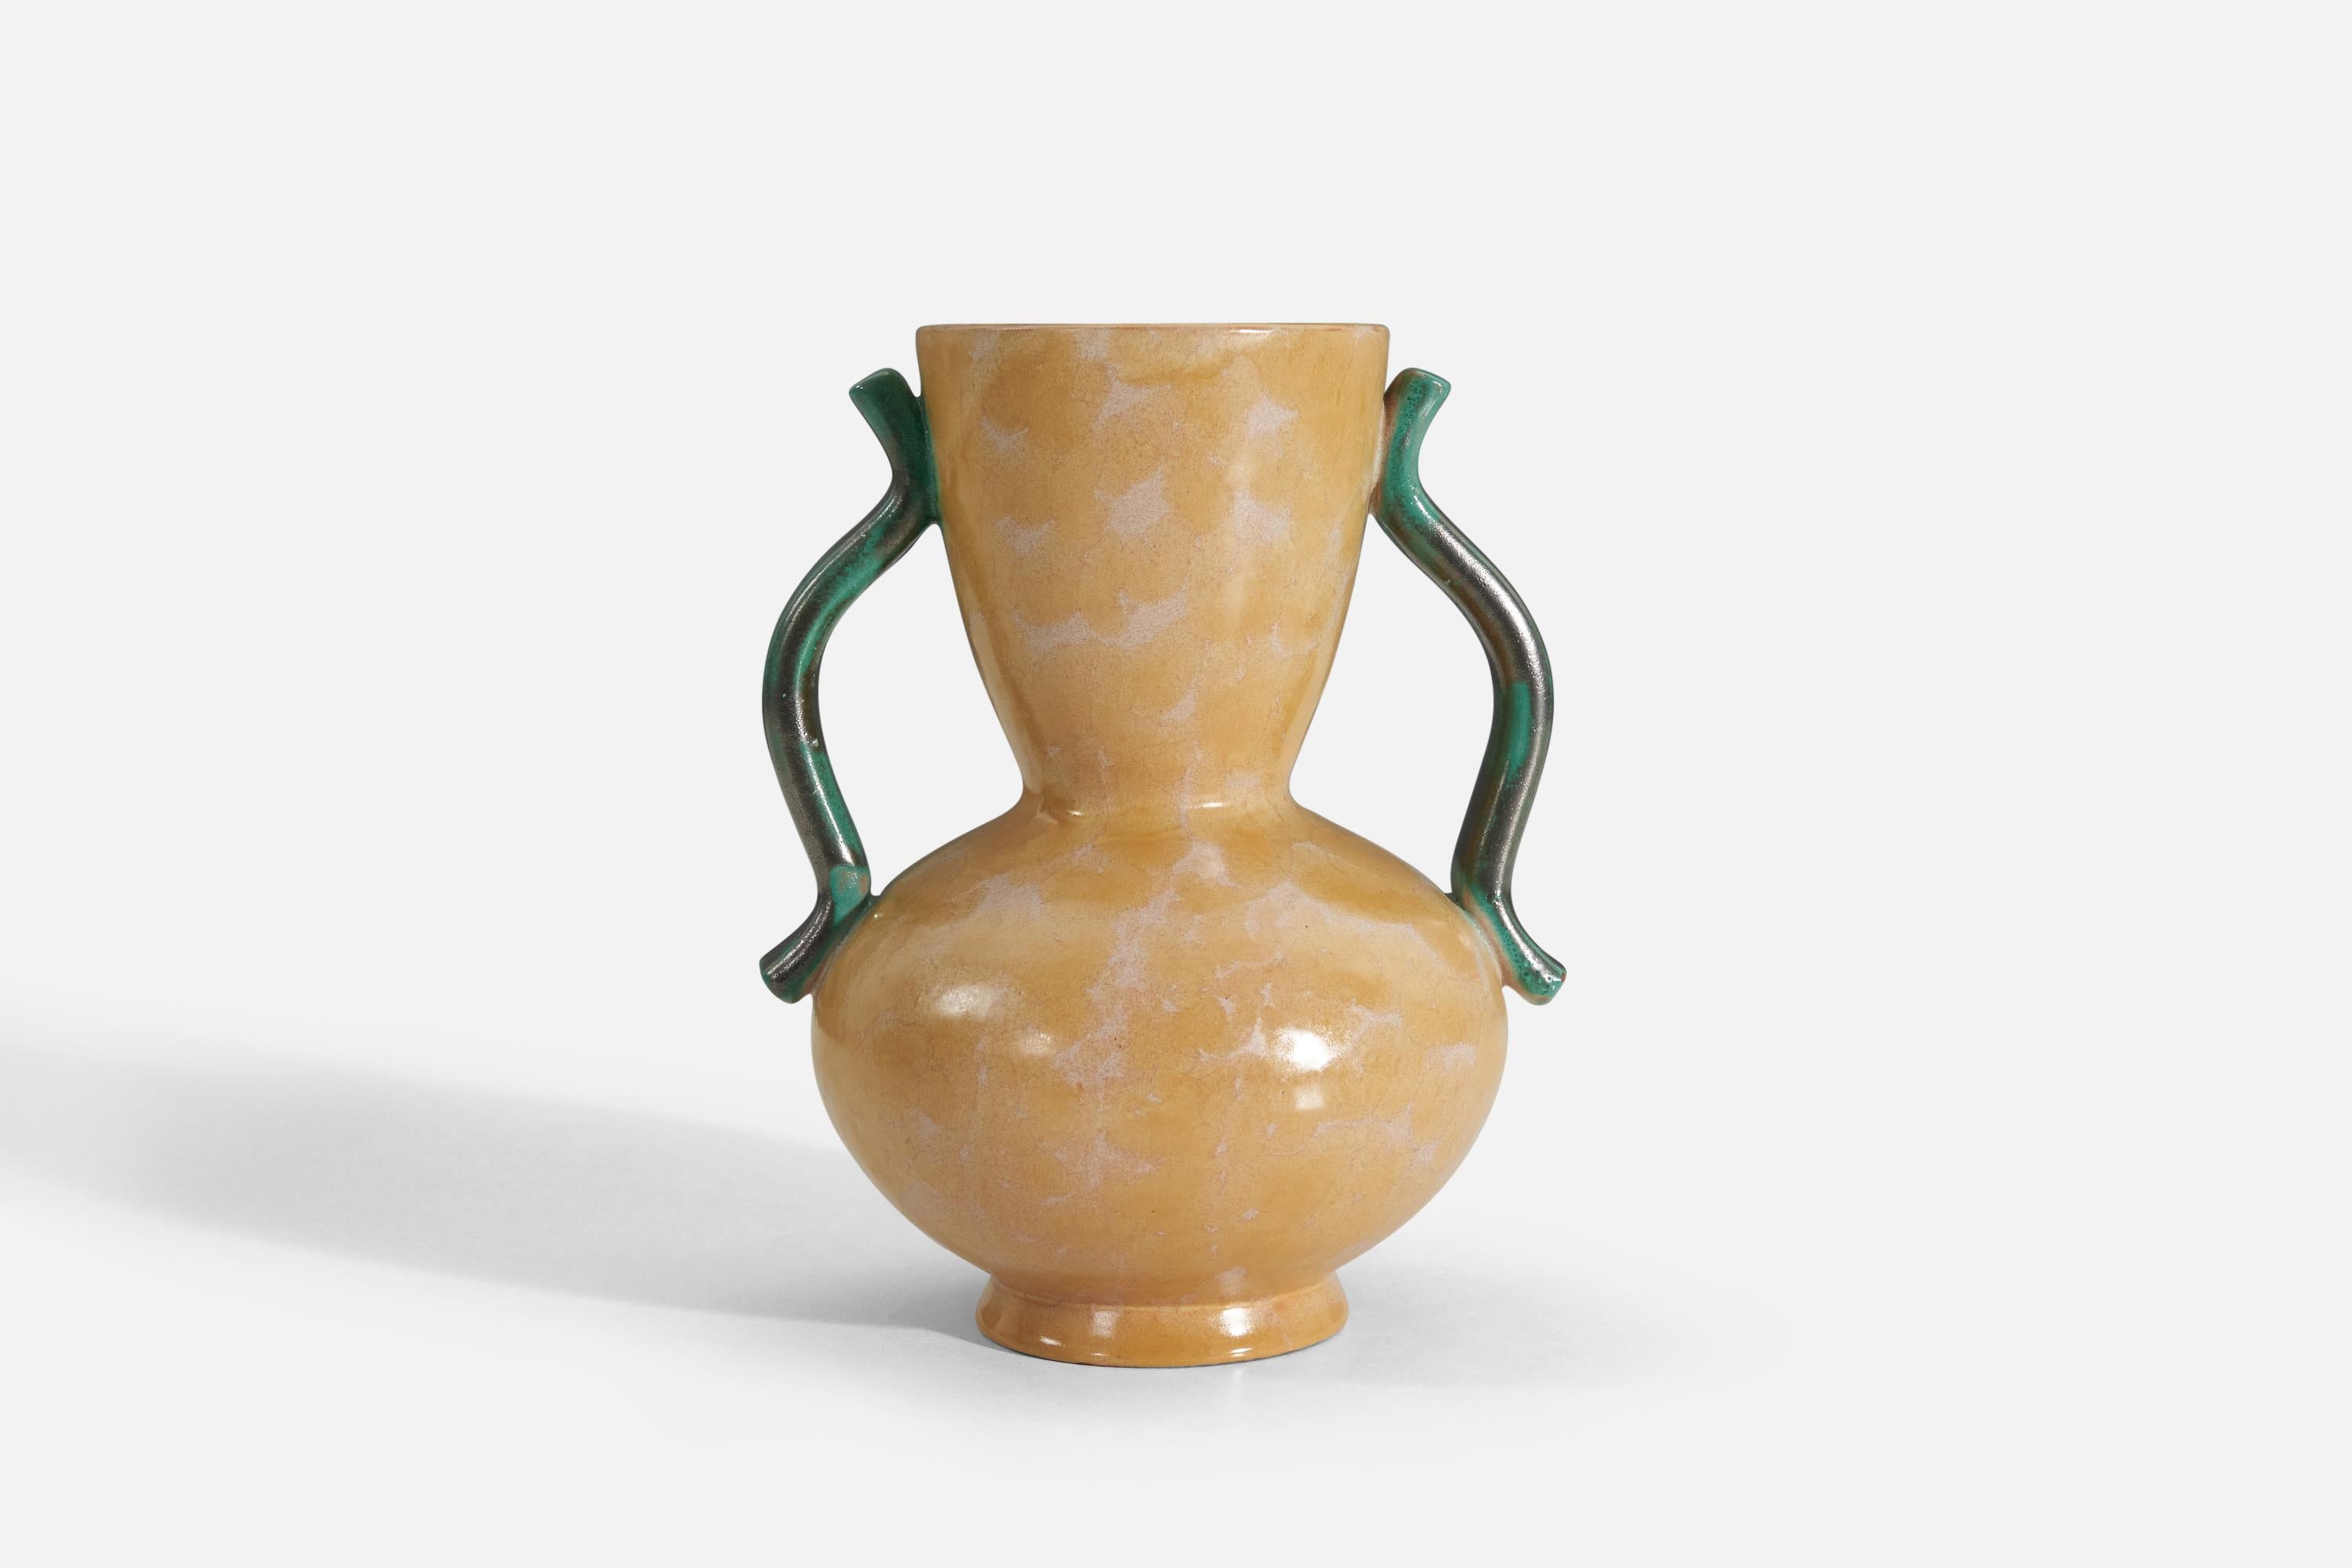 A yellow glazed vase with green handles designed by Anna-Lisa Thomson, for Upsala-Ekeby, Sweden, 1940s.

